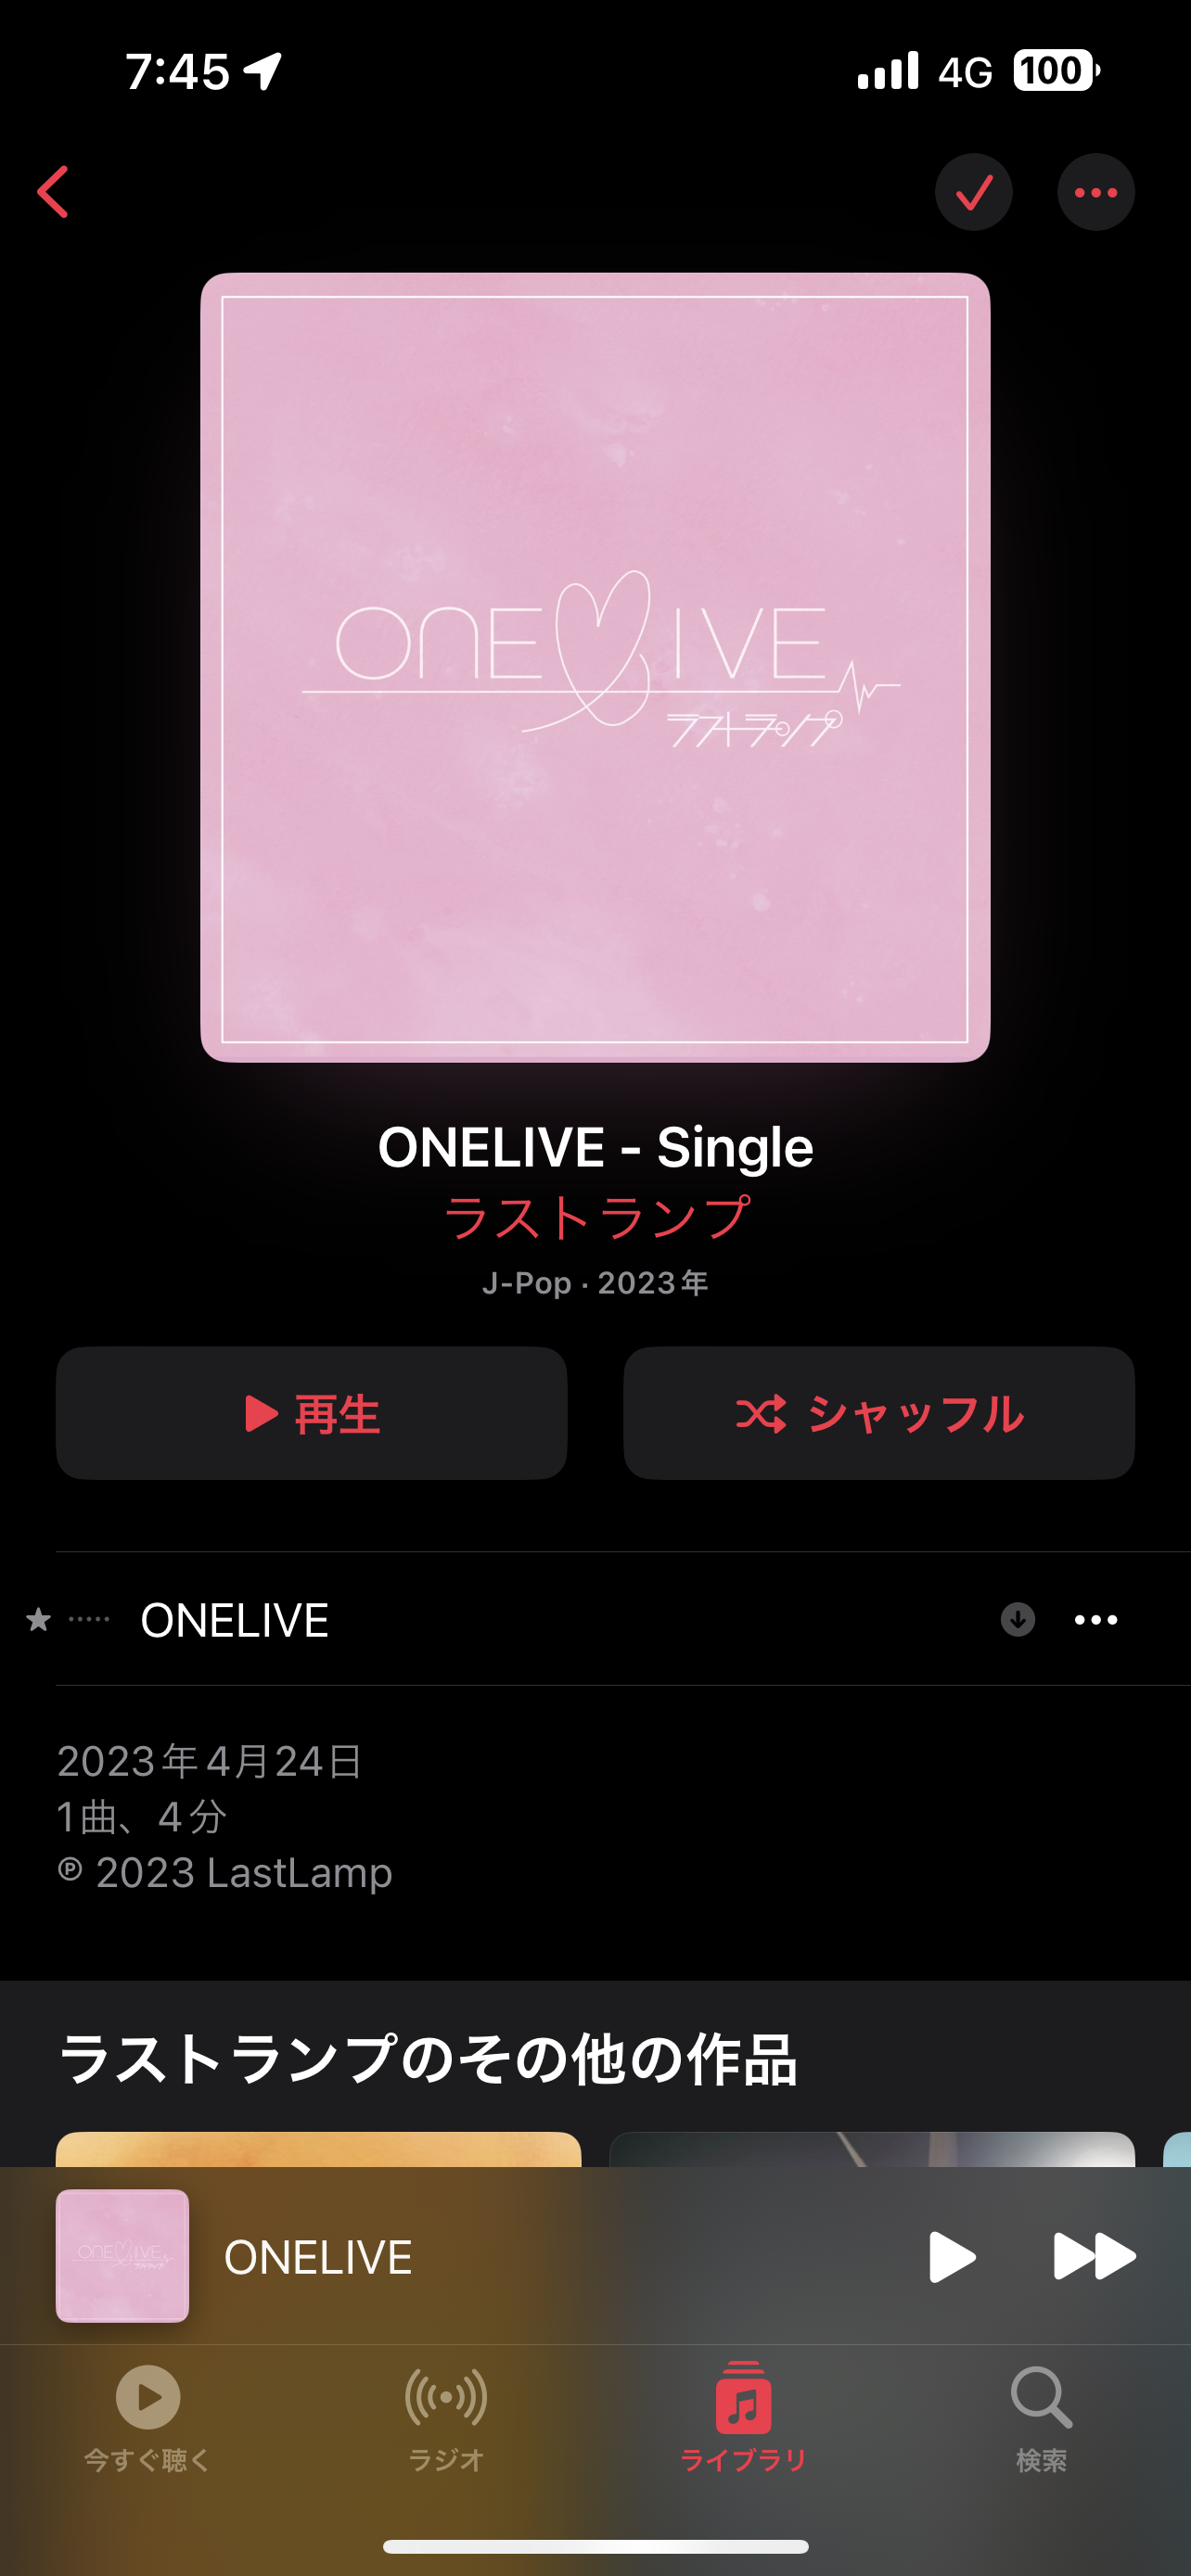 ONELIVE